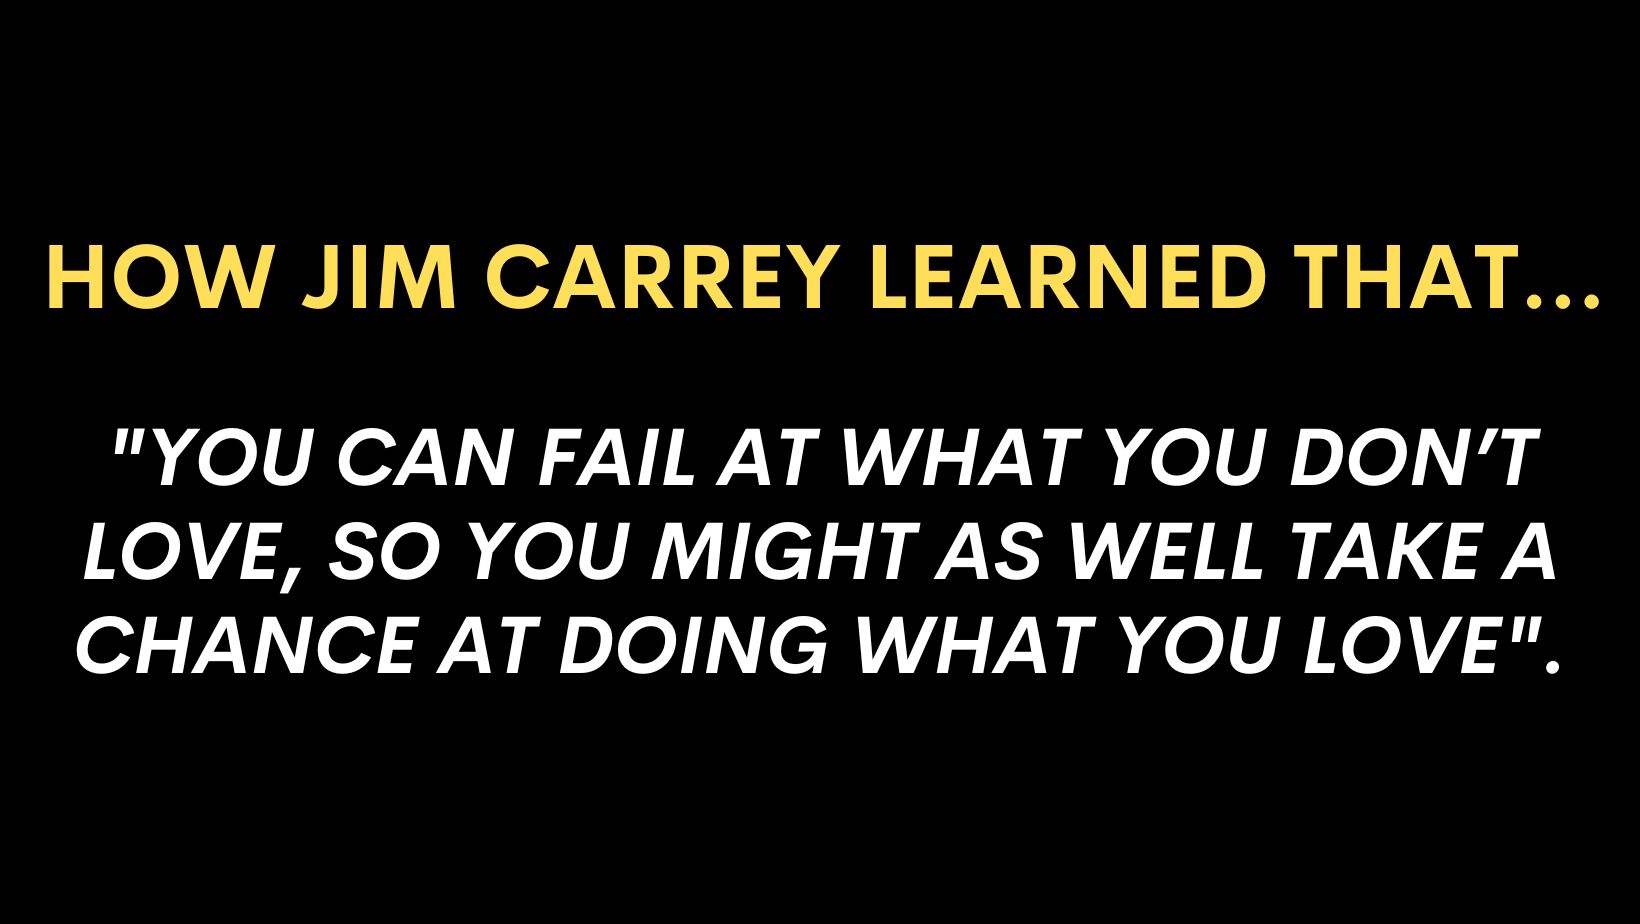 Why Jim Carrey’s Dad Failed At What He Didn’t Love